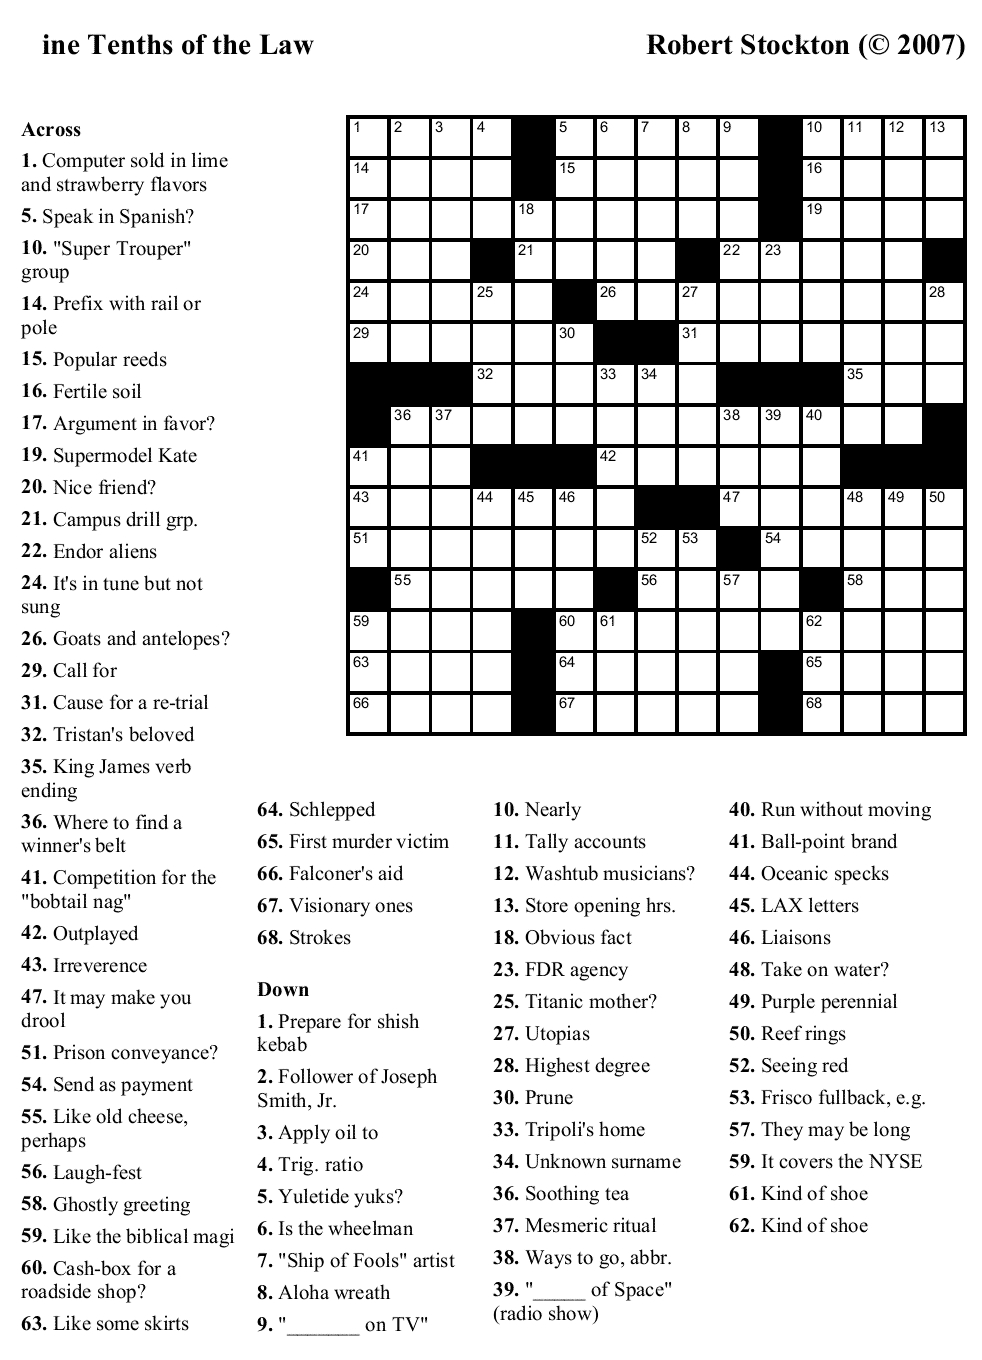 Crossword Puzzles Printable - Yahoo Image Search Results | Crossword - Free Printable Themed Crossword Puzzles